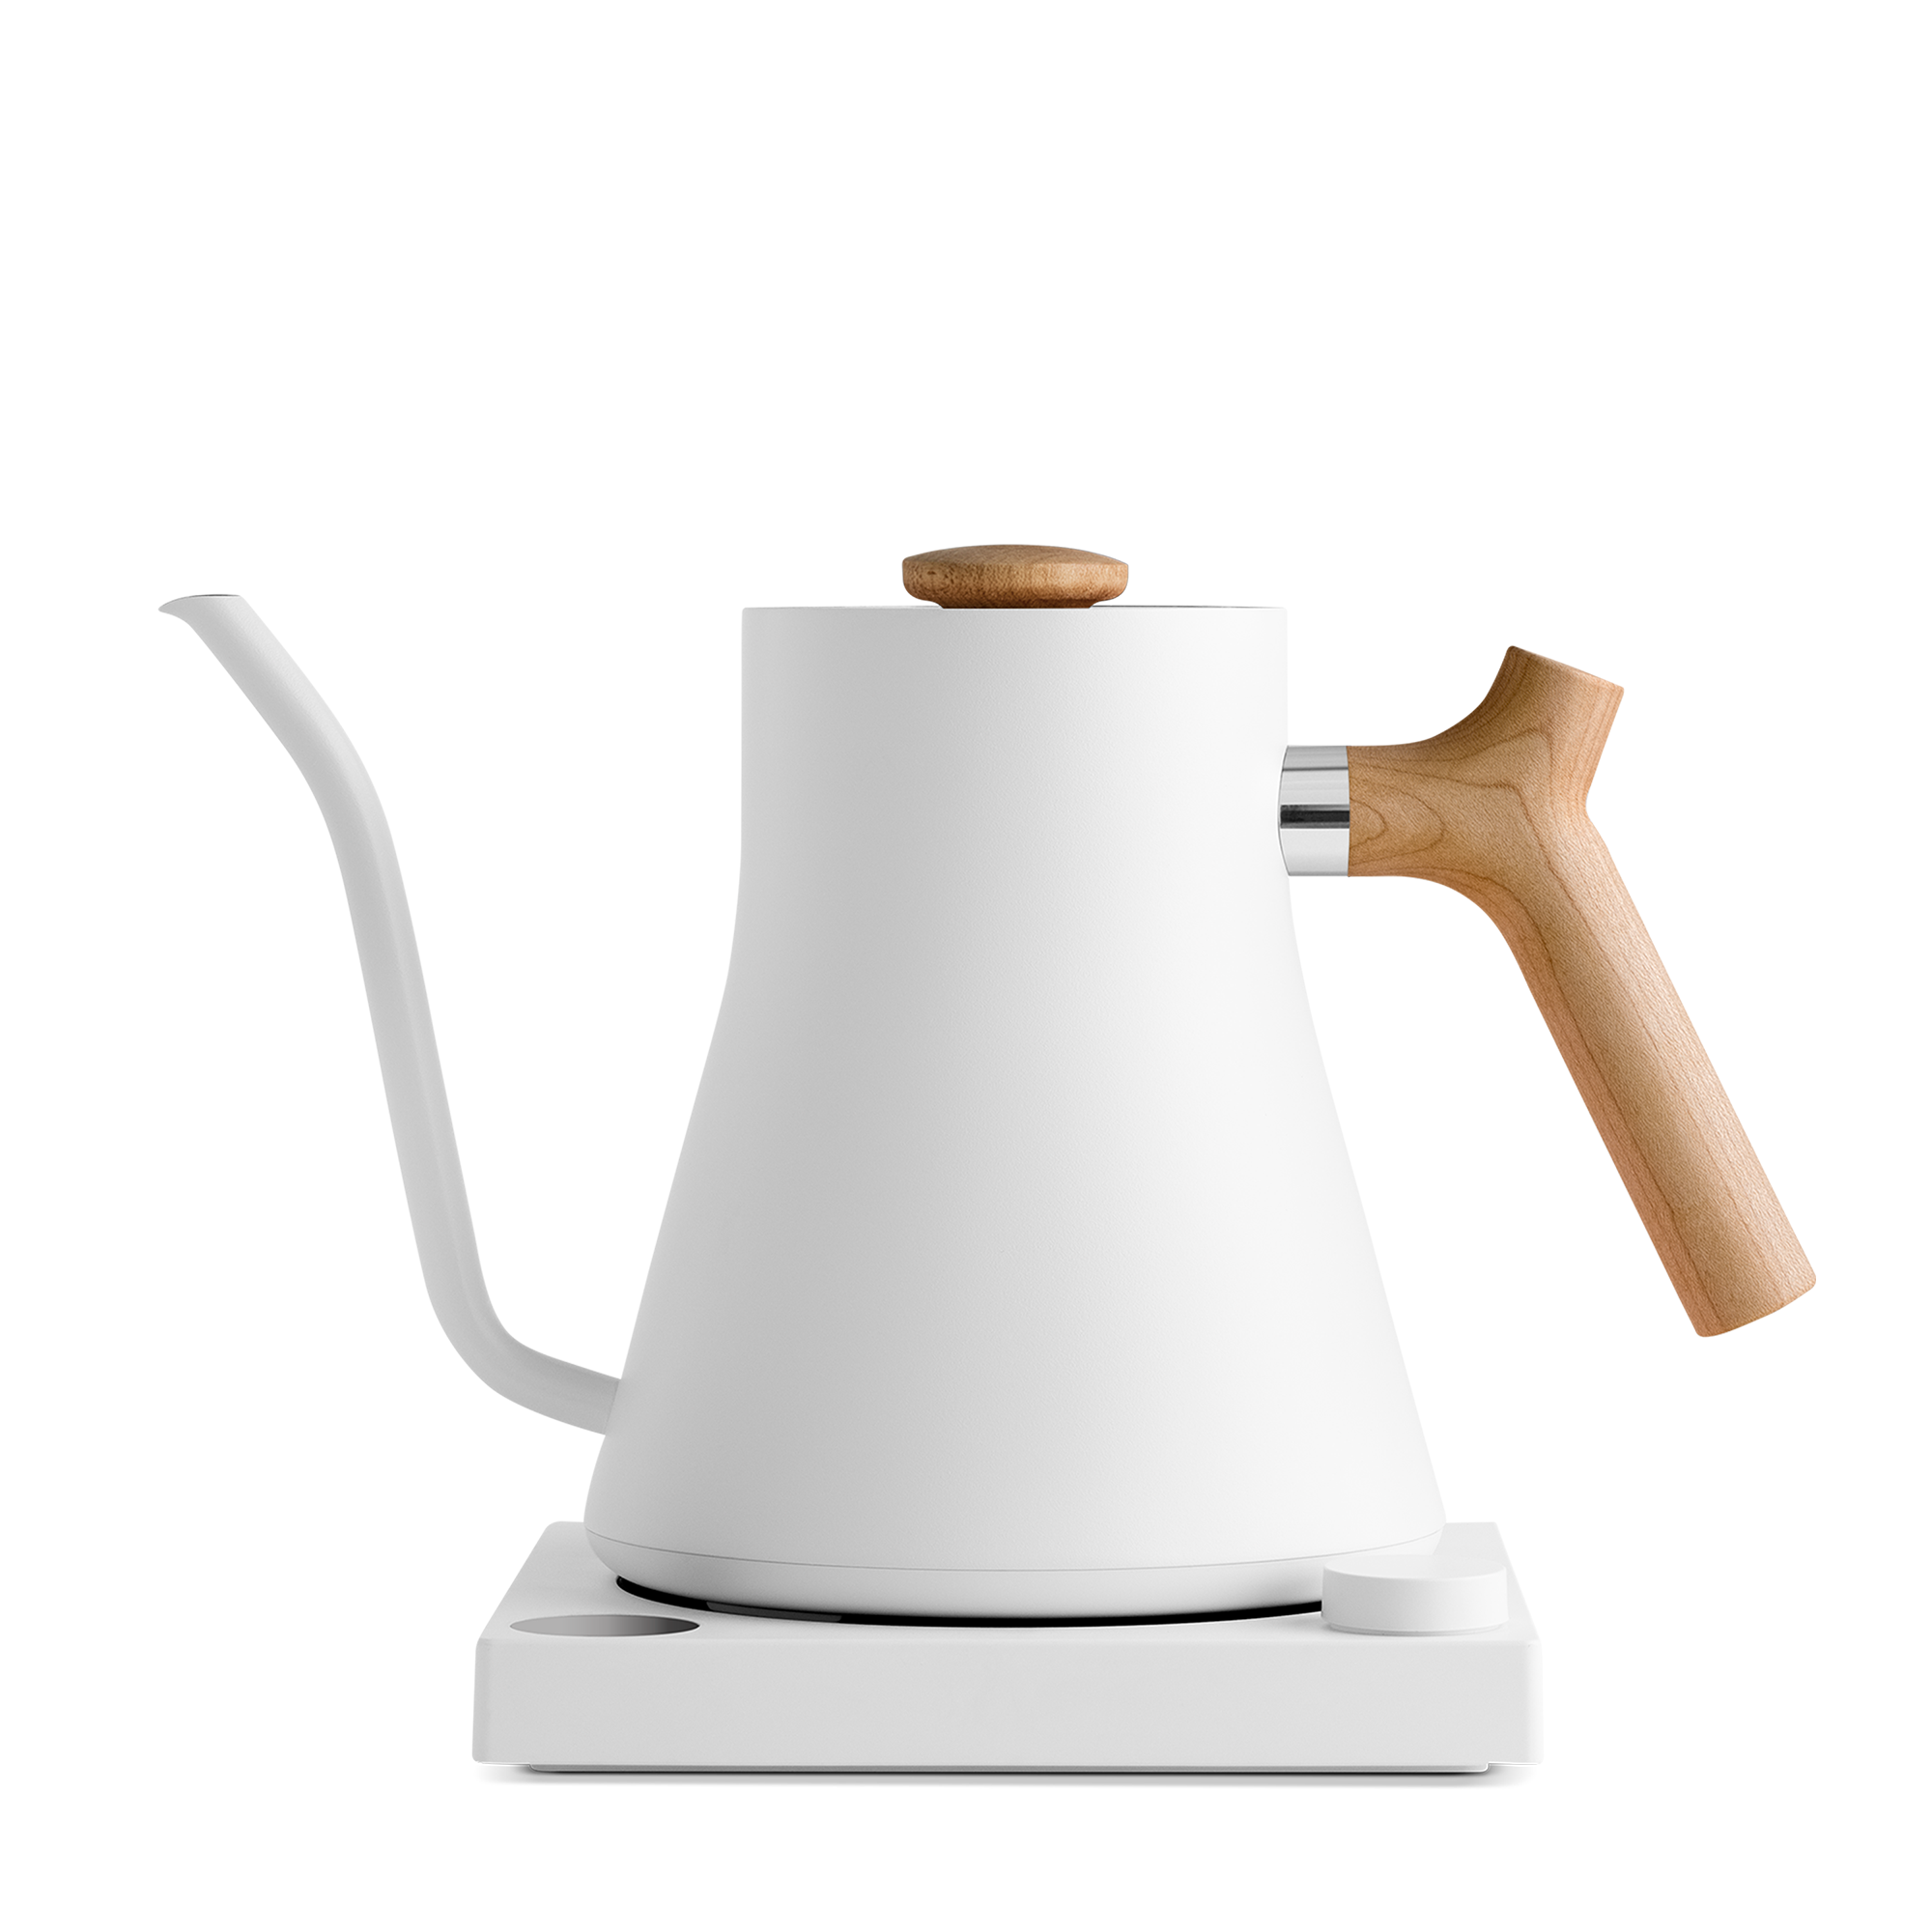 Stagg ‎EKG Pro Electric Kettle